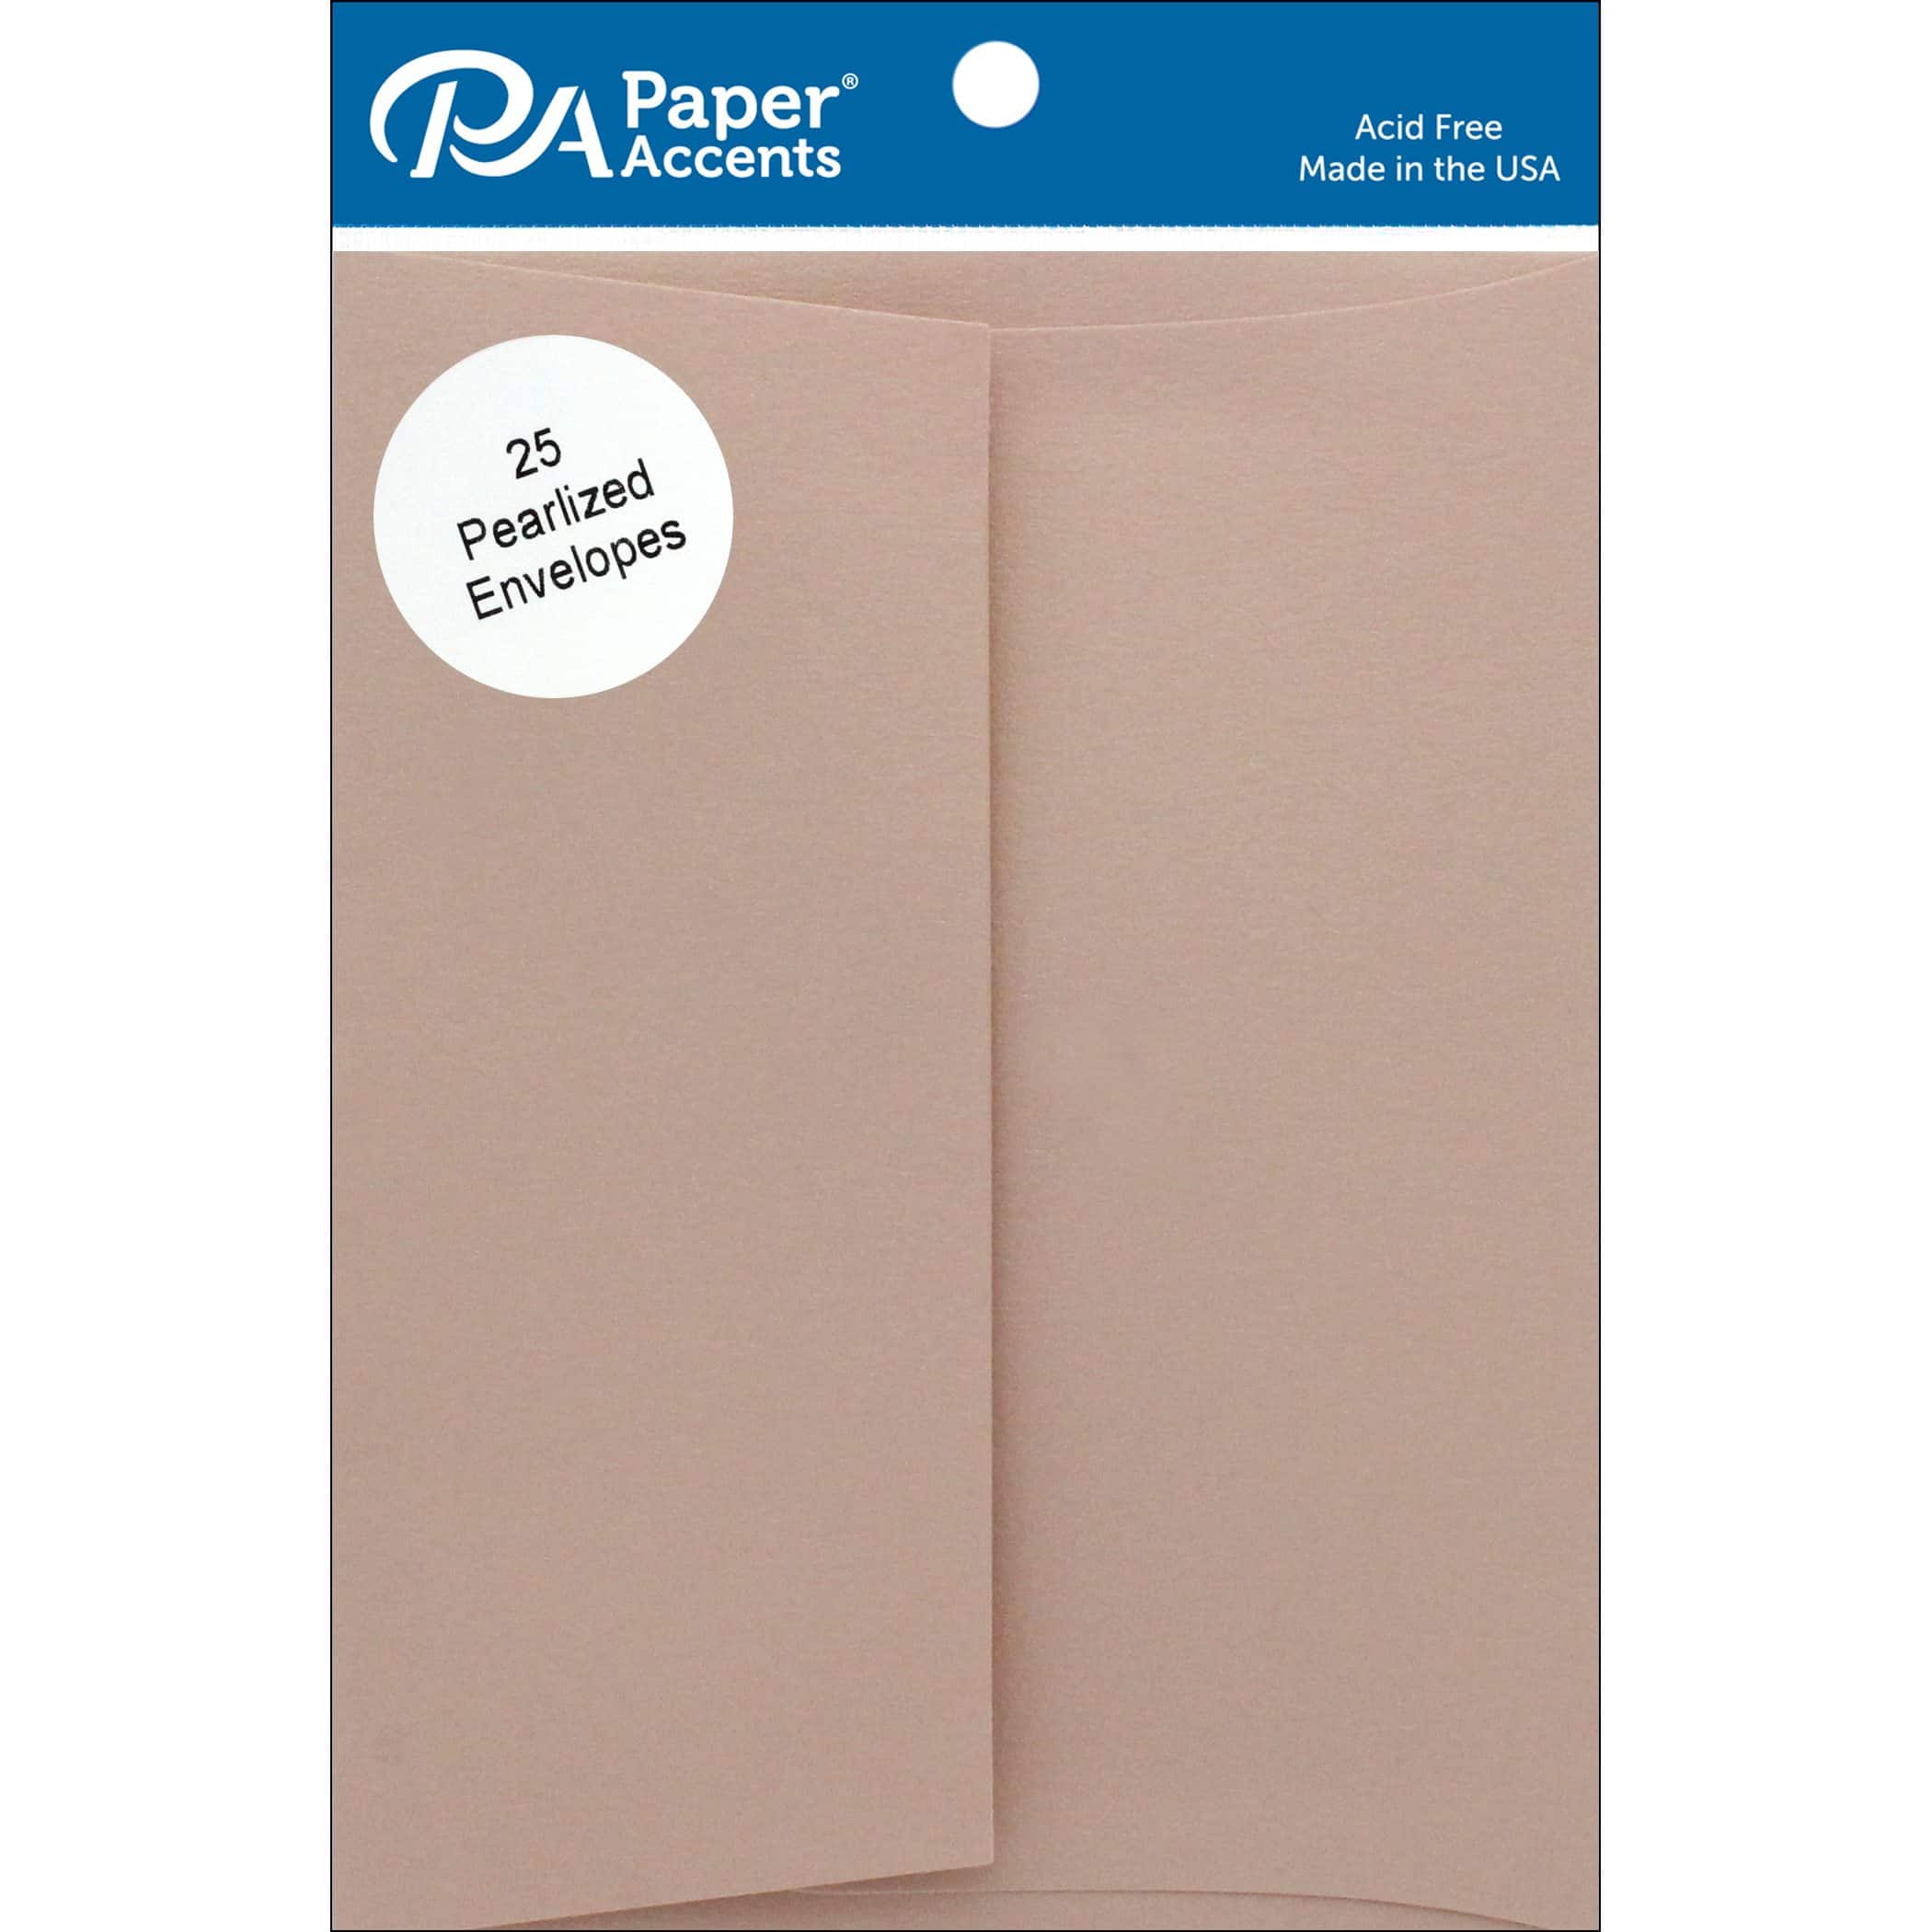 PA Paper™ Accents 4.38" x 5.75" Pearlized Envelope, 25ct.